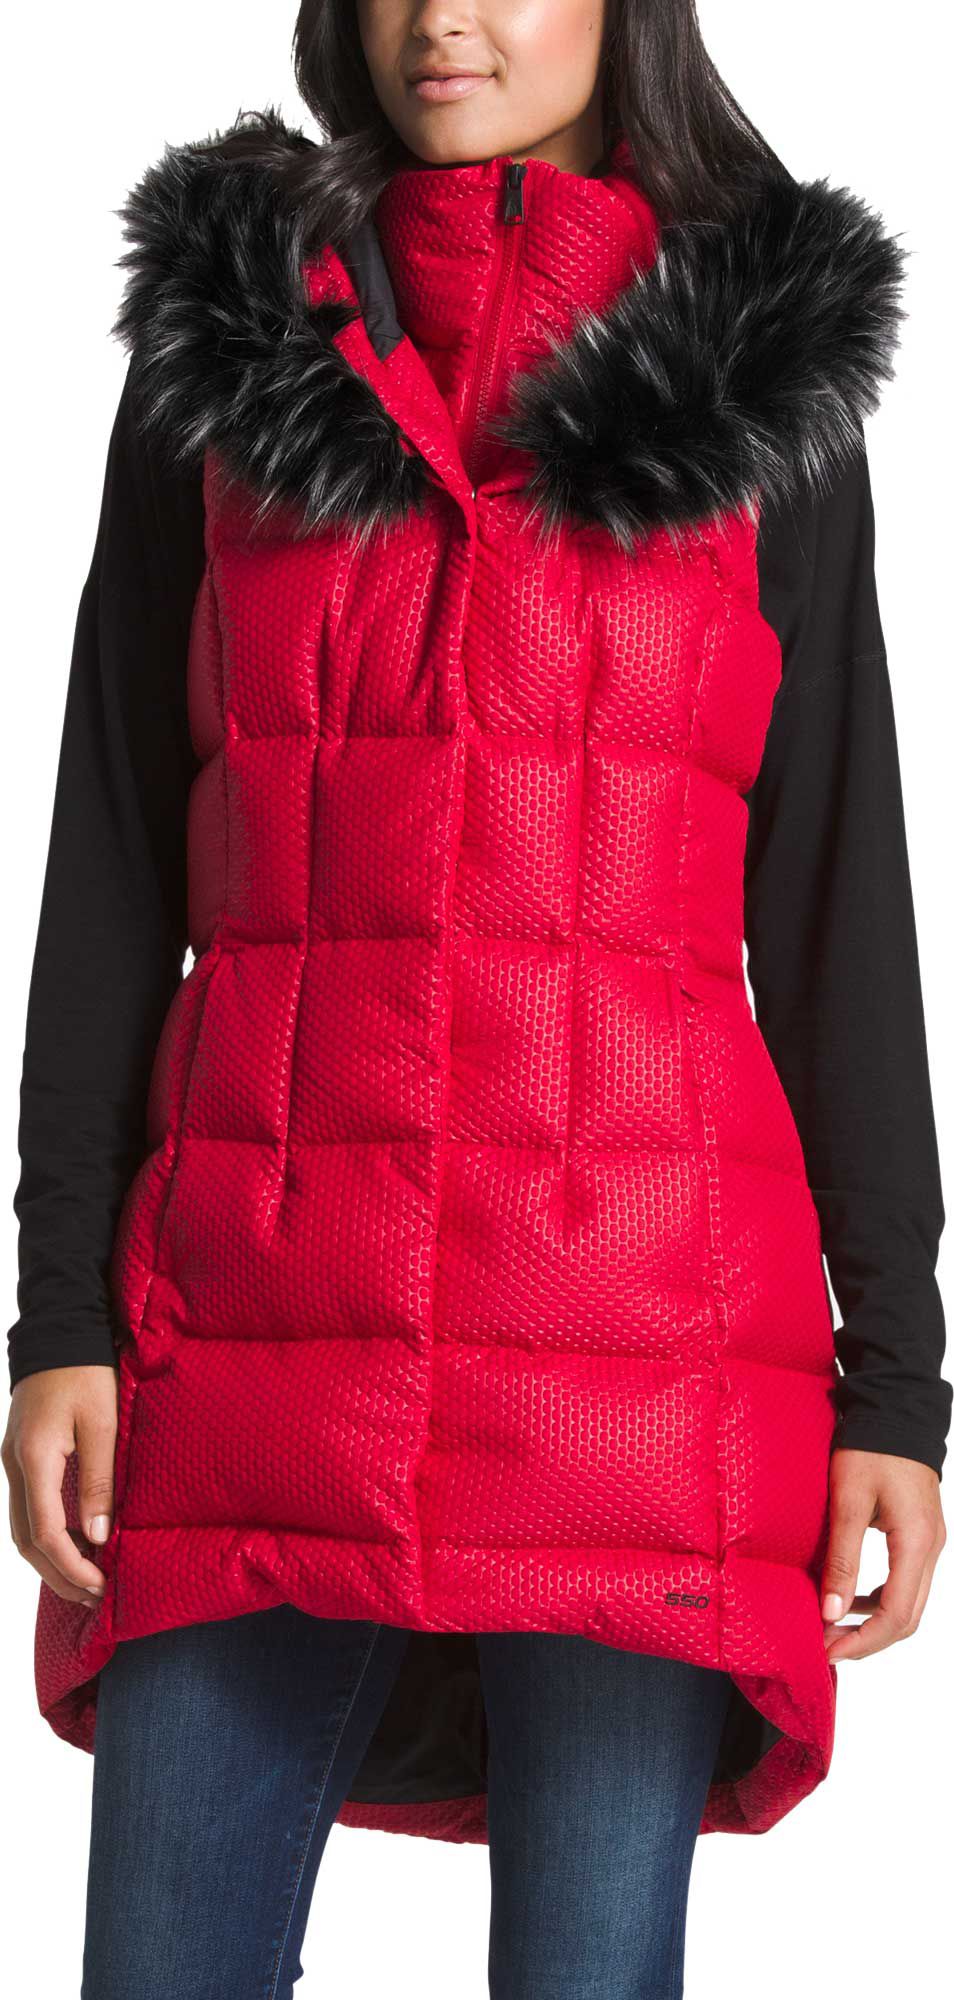 north face jacket with fur hood womens